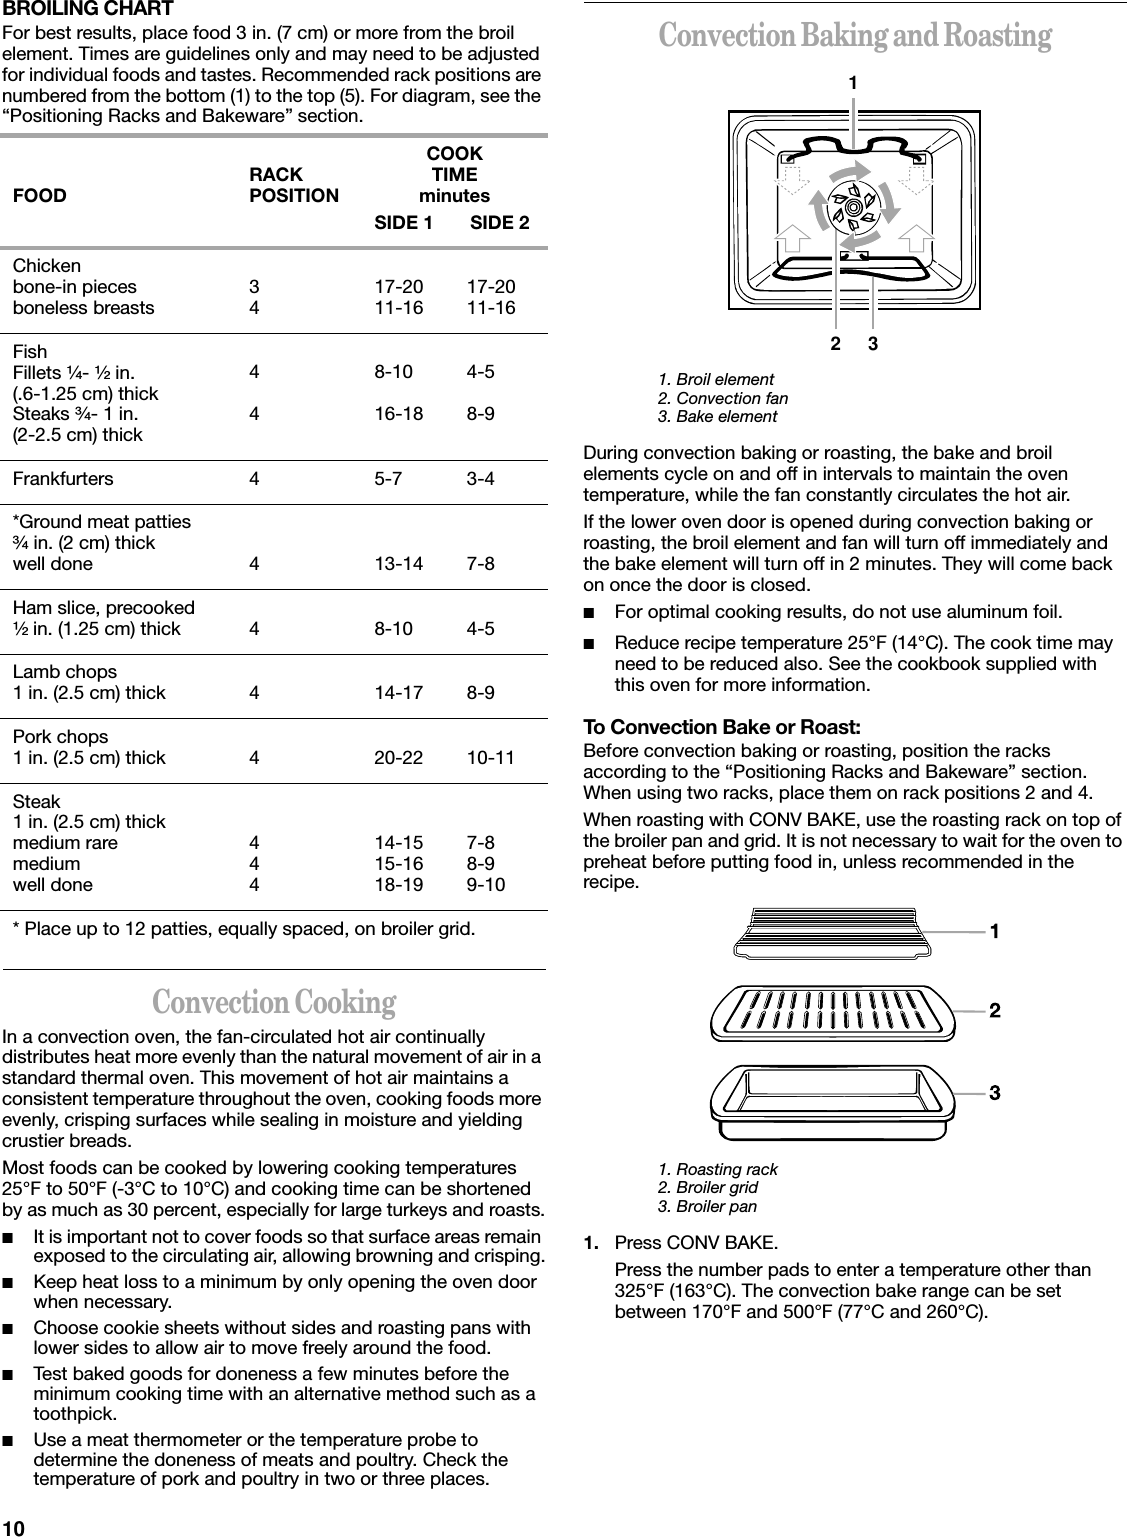 10BROILING CHARTFor best results, place food 3 in. (7 cm) or more from the broil element. Times are guidelines only and may need to be adjusted for individual foods and tastes. Recommended rack positions are numbered from the bottom (1) to the top (5). For diagram, see the “Positioning Racks and Bakeware” section.Convection CookingIn a convection oven, the fan-circulated hot air continually distributes heat more evenly than the natural movement of air in a standard thermal oven. This movement of hot air maintains a consistent temperature throughout the oven, cooking foods more evenly, crisping surfaces while sealing in moisture and yielding crustier breads.Most foods can be cooked by lowering cooking temperatures 25°F to 50°F (-3°C to 10°C) and cooking time can be shortened by as much as 30 percent, especially for large turkeys and roasts.■It is important not to cover foods so that surface areas remain exposed to the circulating air, allowing browning and crisping.■Keep heat loss to a minimum by only opening the oven door when necessary.■Choose cookie sheets without sides and roasting pans with lower sides to allow air to move freely around the food.■Test baked goods for doneness a few minutes before the minimum cooking time with an alternative method such as a toothpick.■Use a meat thermometer or the temperature probe to determine the doneness of meats and poultry. Check the temperature of pork and poultry in two or three places.Convection Baking and Roasting1. Broil element2. Convection fan3. Bake elementDuring convection baking or roasting, the bake and broil elements cycle on and off in intervals to maintain the oven temperature, while the fan constantly circulates the hot air.If the lower oven door is opened during convection baking or roasting, the broil element and fan will turn off immediately and the bake element will turn off in 2 minutes. They will come back on once the door is closed.■For optimal cooking results, do not use aluminum foil.■Reduce recipe temperature 25°F (14°C). The cook time may need to be reduced also. See the cookbook supplied with this oven for more information. To Convection Bake or Roast:Before convection baking or roasting, position the racks according to the “Positioning Racks and Bakeware” section. When using two racks, place them on rack positions 2 and 4.When roasting with CONV BAKE, use the roasting rack on top of the broiler pan and grid. It is not necessary to wait for the oven to preheat before putting food in, unless recommended in the recipe.1. Roasting rack2. Broiler grid3. Broiler pan1. Press CONV BAKE.Press the number pads to enter a temperature other than 325°F (163°C). The convection bake range can be set between 170°F and 500°F (77°C and 260°C).FOOD RACK POSITIONCOOKTIMEminutesSIDE 1       SIDE 2Chickenbone-in piecesboneless breasts 3417-2011-16 17-2011-16FishFillets ¹|₄- ¹|₂ in.(.6-1.25 cm) thickSteaks ³|₄- 1 in.(2-2.5 cm) thick448-1016-184-58-9Frankfurters 4 5-7 3-4*Ground meat patties³|₄ in. (2 cm) thickwell done 4 13-14 7-8Ham slice, precooked¹|₂ in. (1.25 cm) thick 4 8-10 4-5Lamb chops1 in. (2.5 cm) thick 4 14-17 8-9Pork chops1 in. (2.5 cm) thick 4 20-22 10-11Steak1 in. (2.5 cm) thickmedium raremediumwell done44414-1515-1618-197-88-99-10* Place up to 12 patties, equally spaced, on broiler grid.132